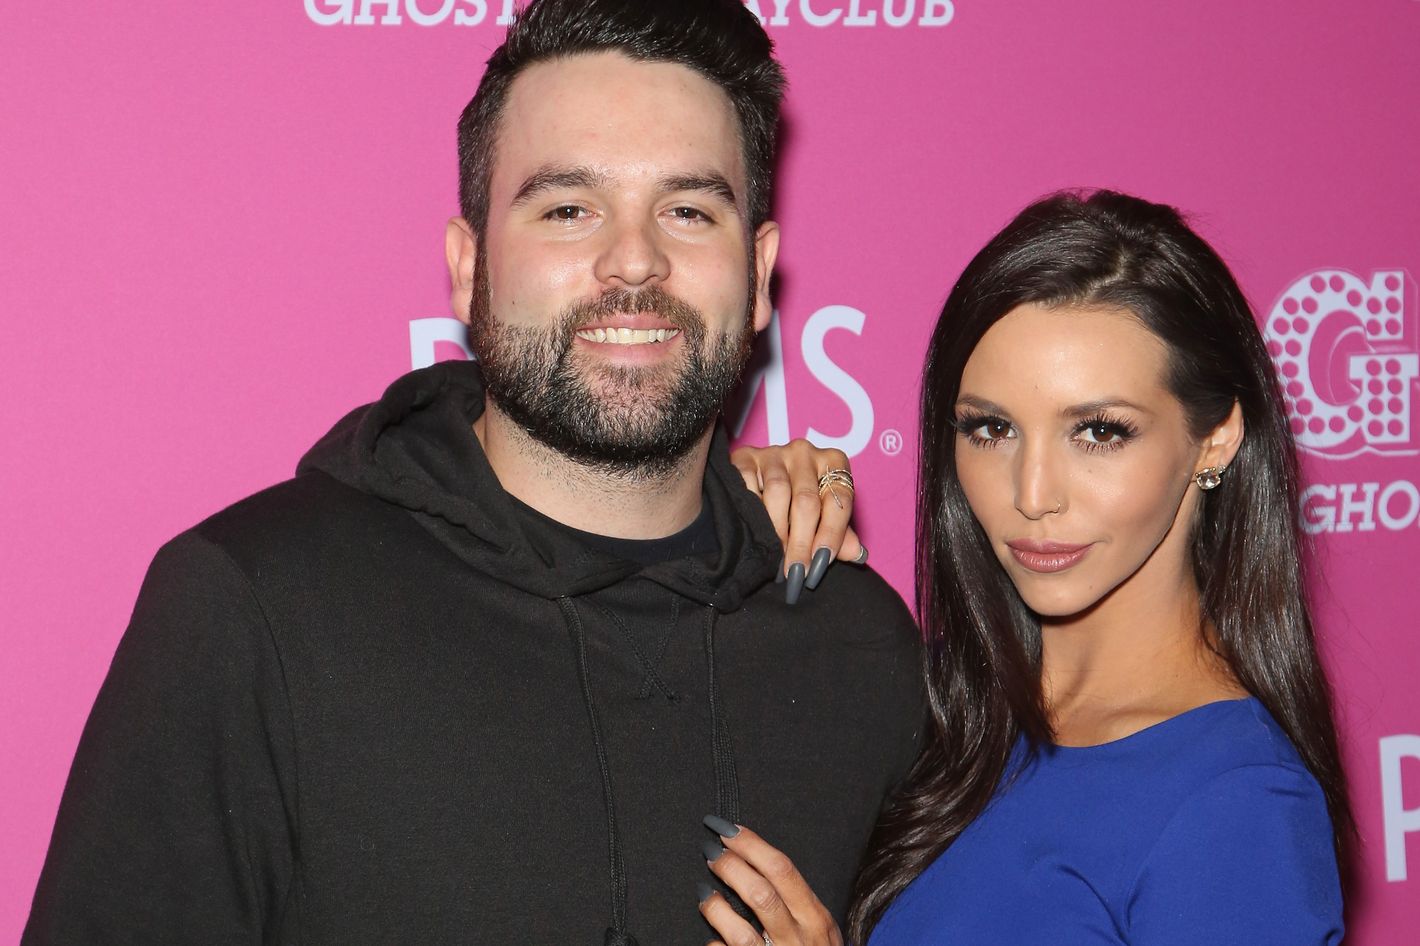 Vanderpump Rules Scheana Marie and Mike Shay to Divorce